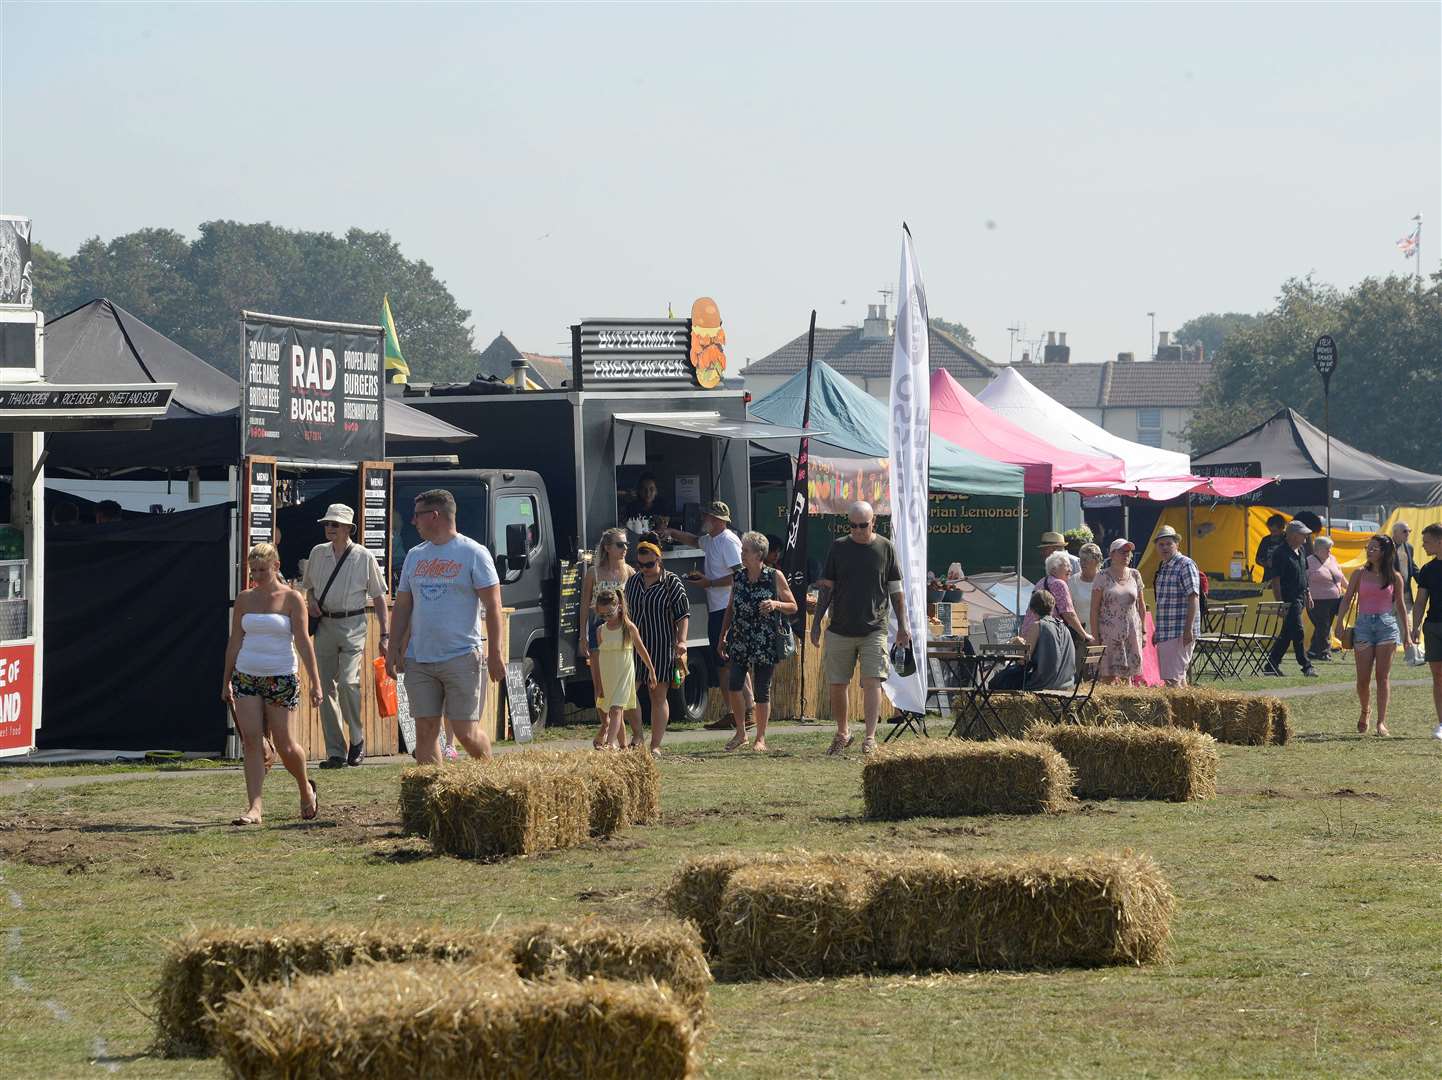 The We Love Hythe Life Food Festival is returning this year, while a new food festival will also take place in Folkestone town centre